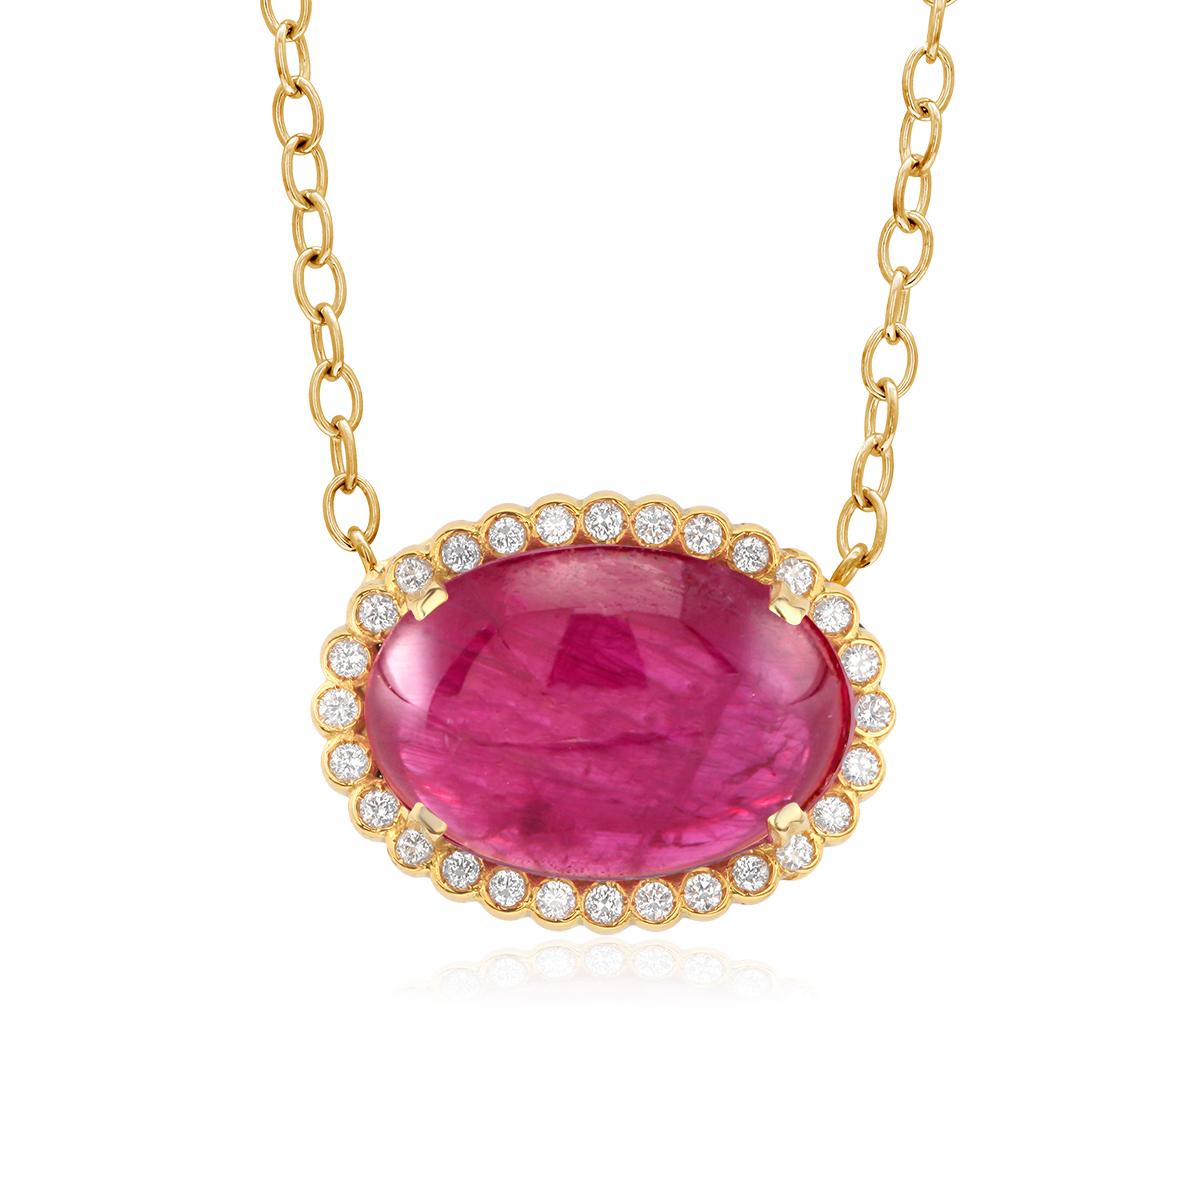 Eighteen karats yellow gold trending layered necklace pendant
Cabochon Ruby and diamond halo charm 
Cabochon Burma ruby weighing 21.26 carats
Diamond weighing 0.55 carats
Ruby hue tone color is pinkish-red
Chain measuring 17 inches long
Charm